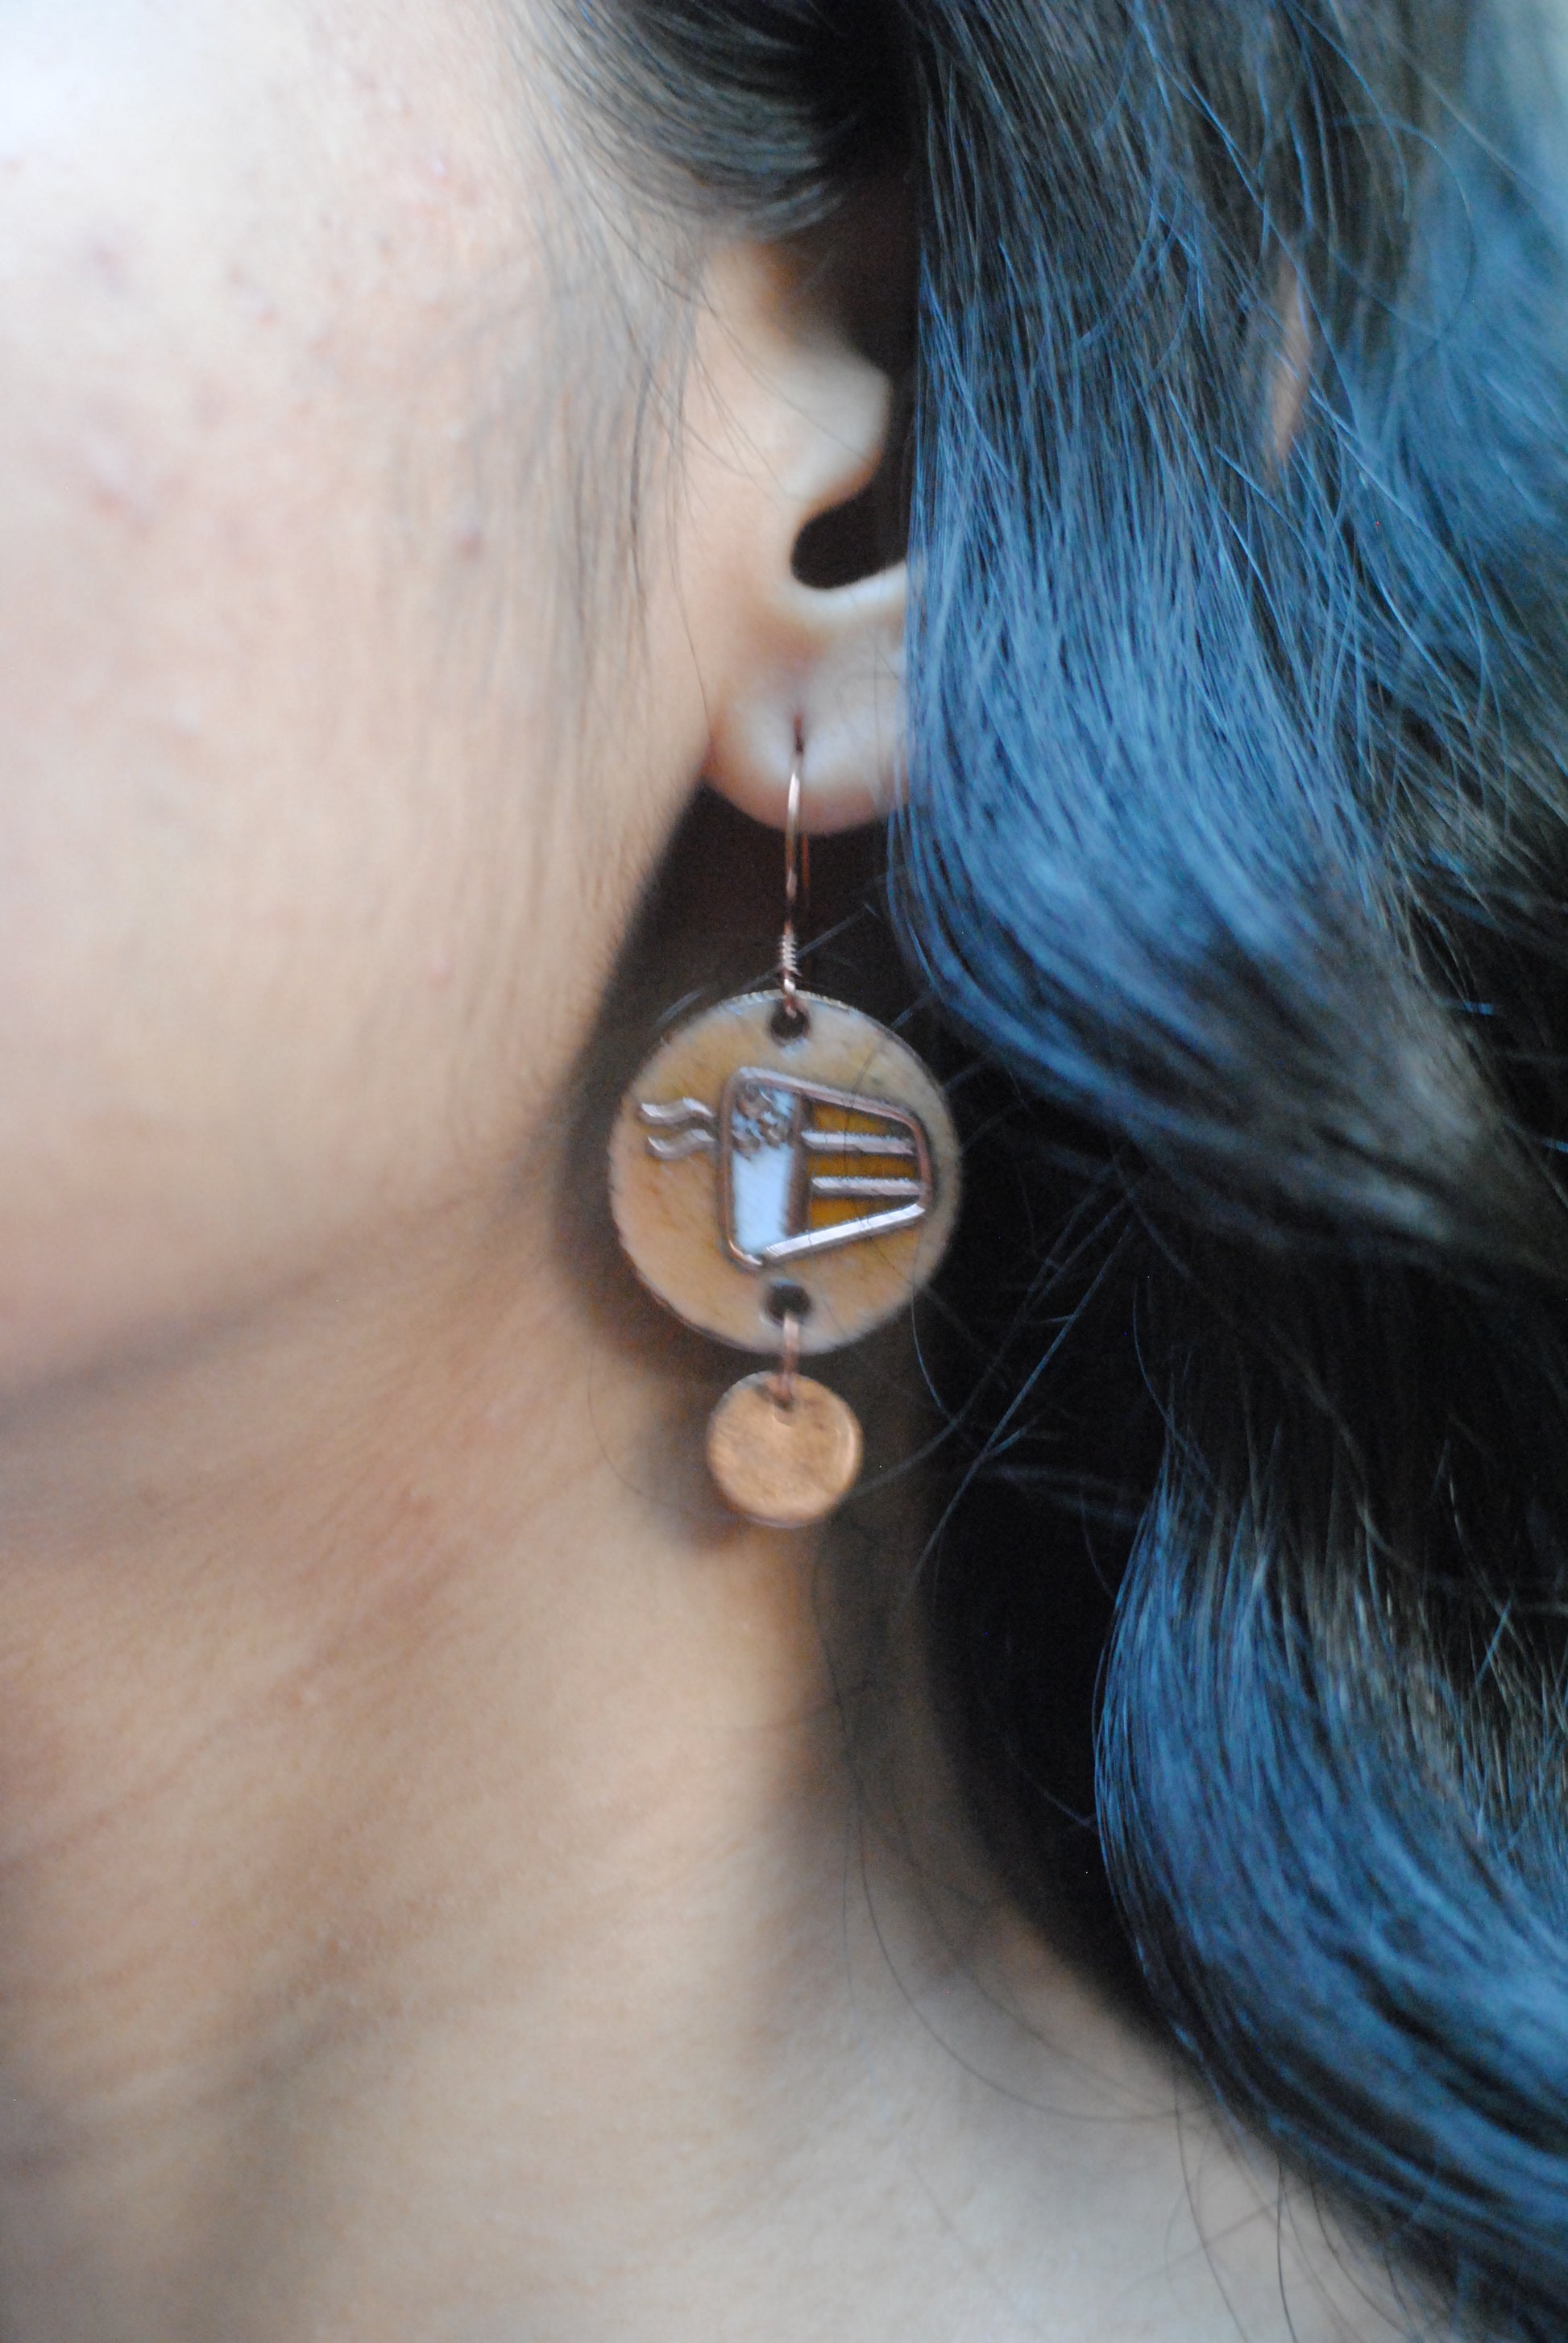 Copper enamel jewelry, funky earrings handcrafted in Maharashtra, India. Chai paani theme